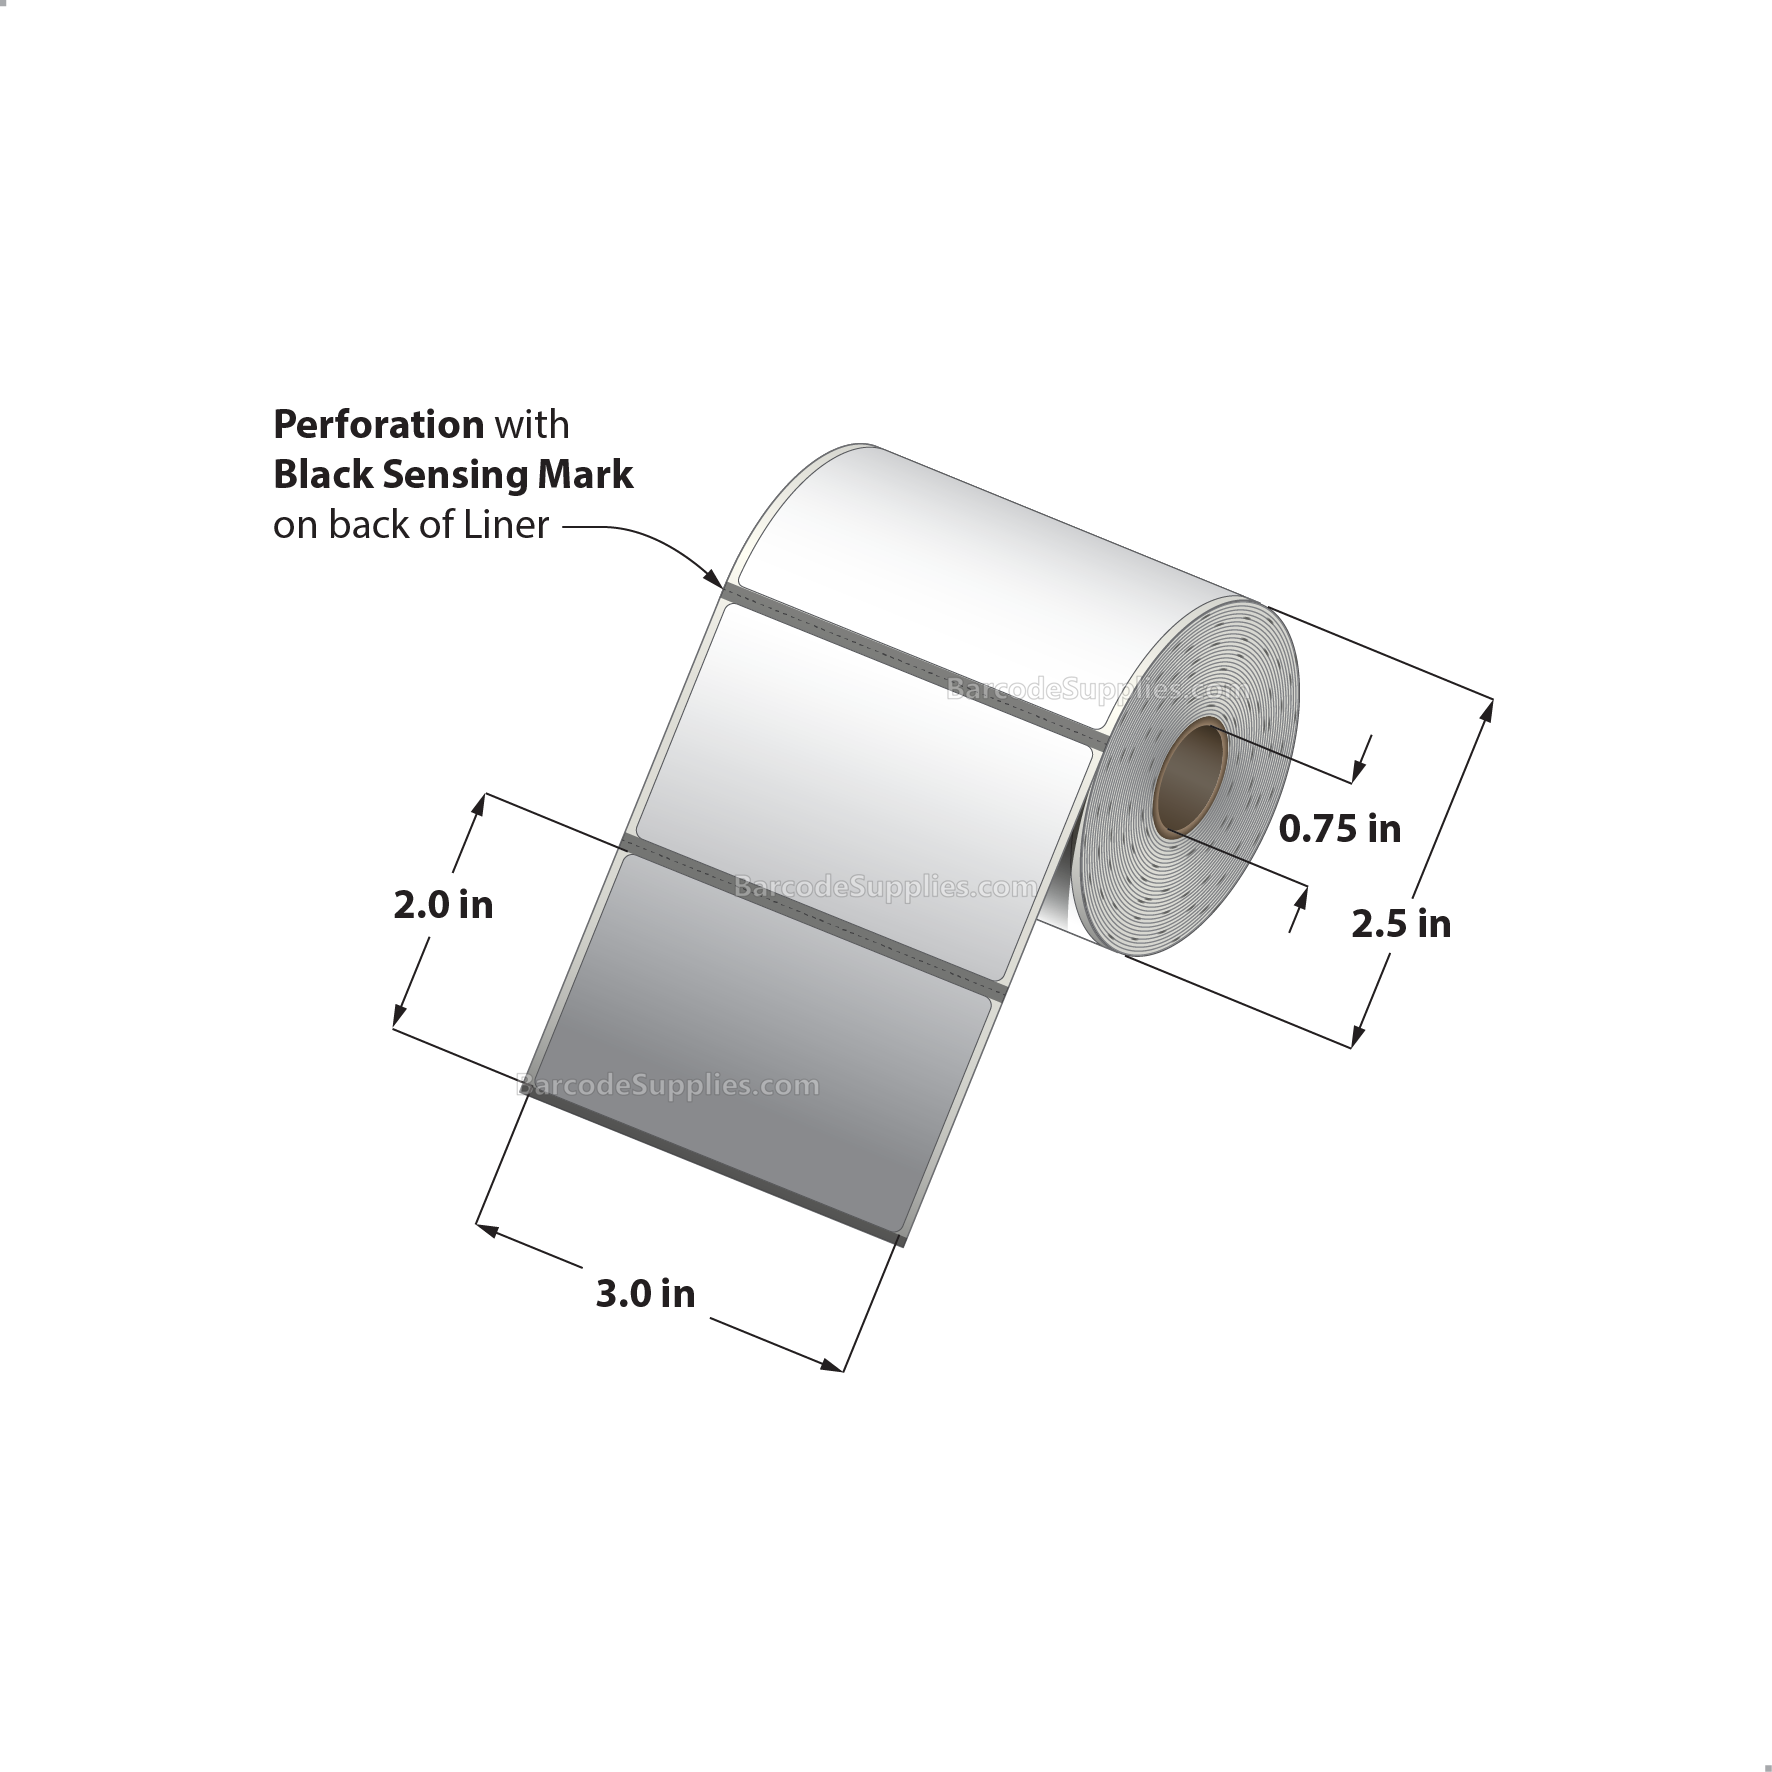 3 x 2 Direct Thermal White Labels With Acrylic Adhesive - Perforated - 300 Labels Per Roll - Carton Of 36 Rolls - 10800 Labels Total - MPN: RD-3-2-300-075